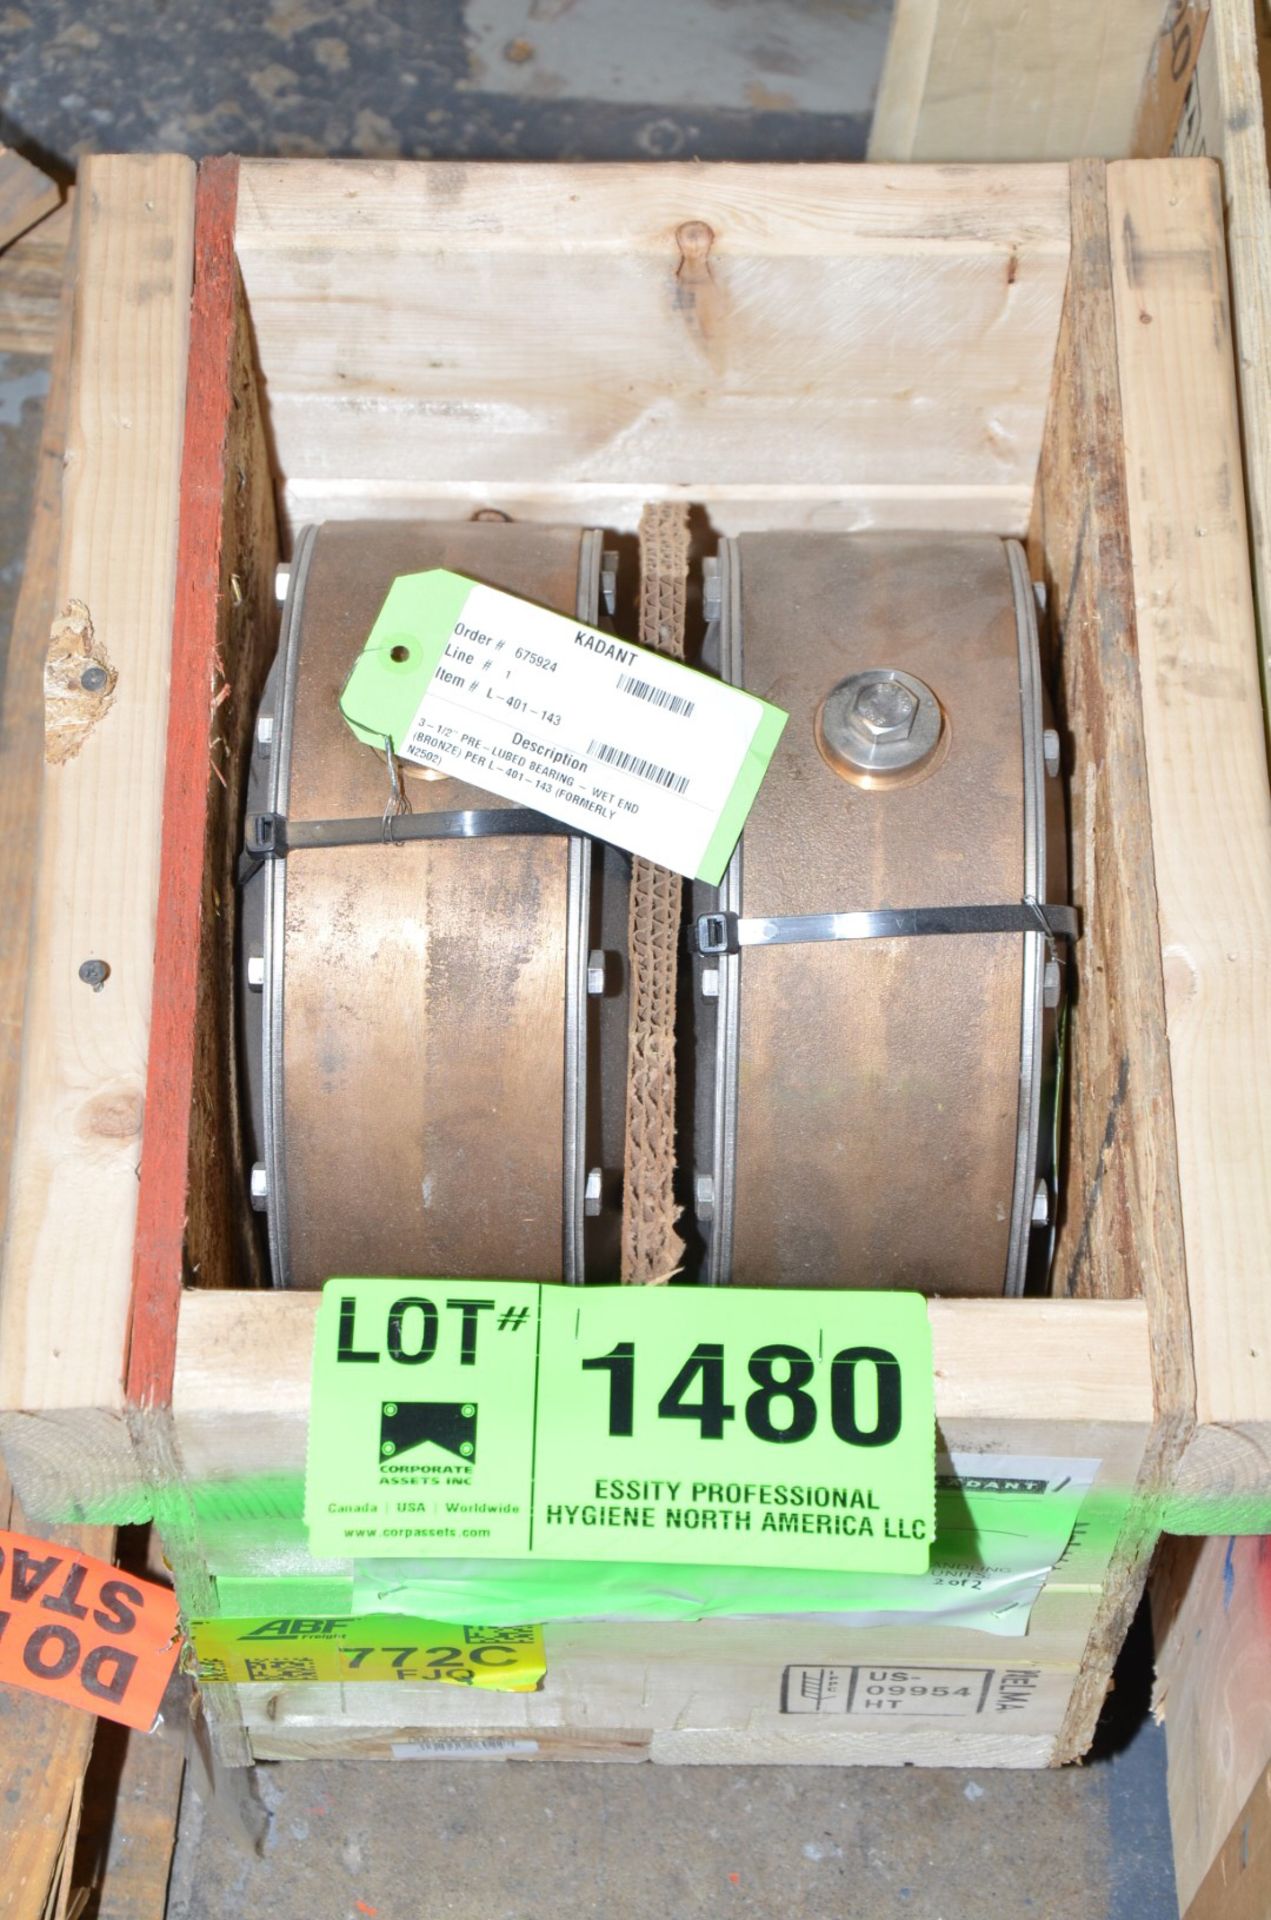 KADANT L-401-143 3.5" PRE LUBED BEARINGS SET [RIGGING FEE FOR LOT #1480 - $25 USD PLUS APPLICABLE